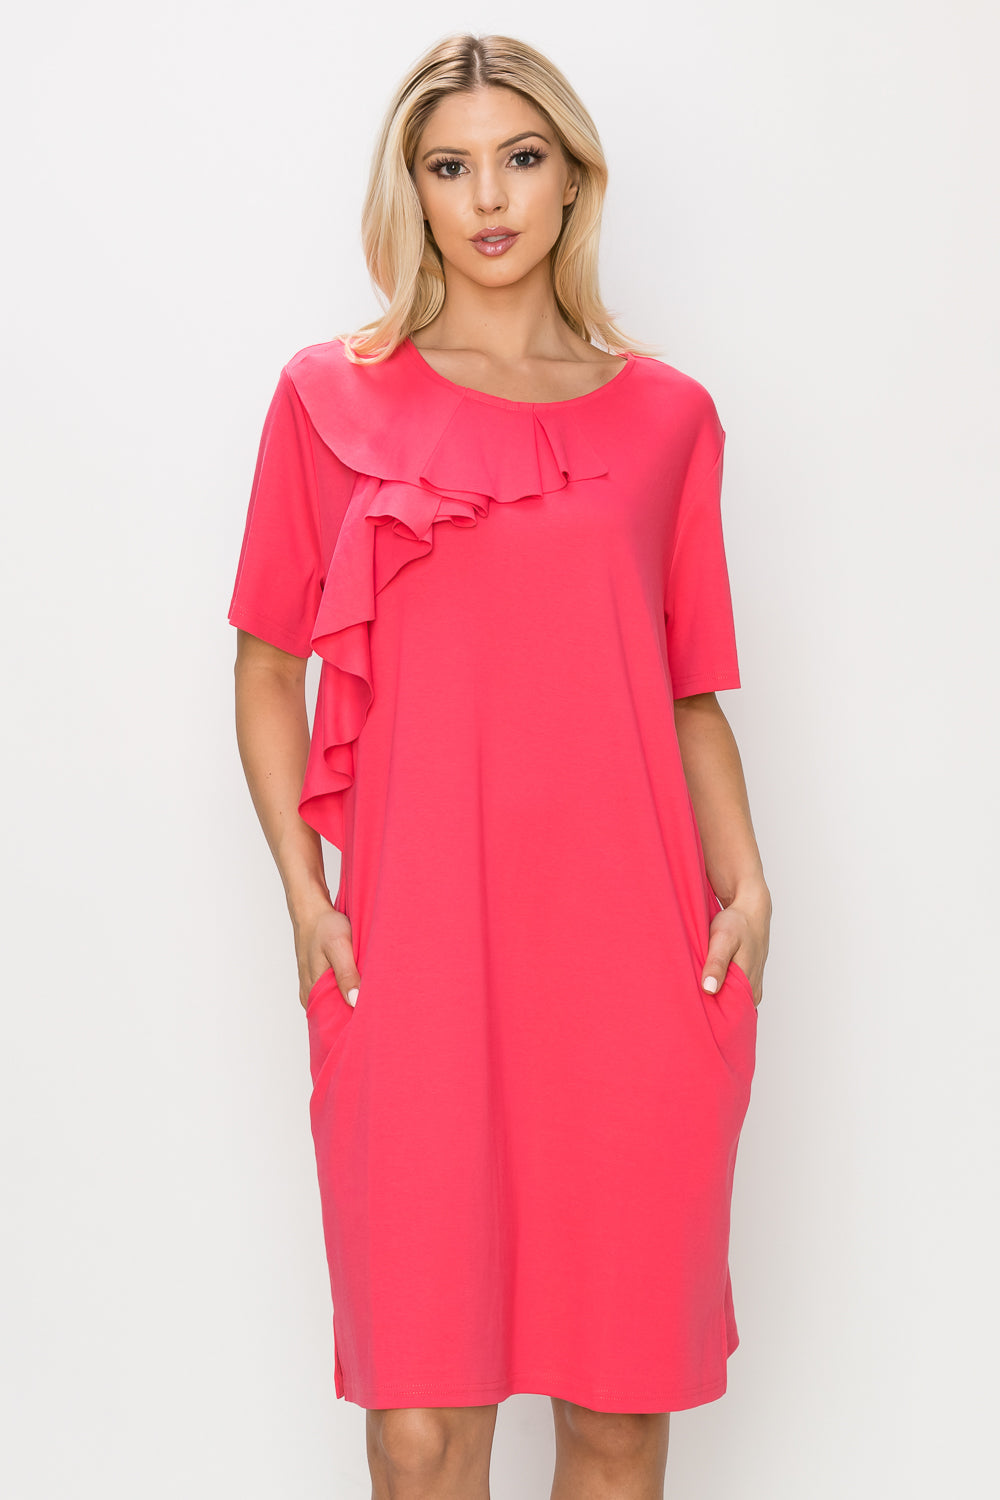 Rena Pointe Knit Front Ruffled Dress